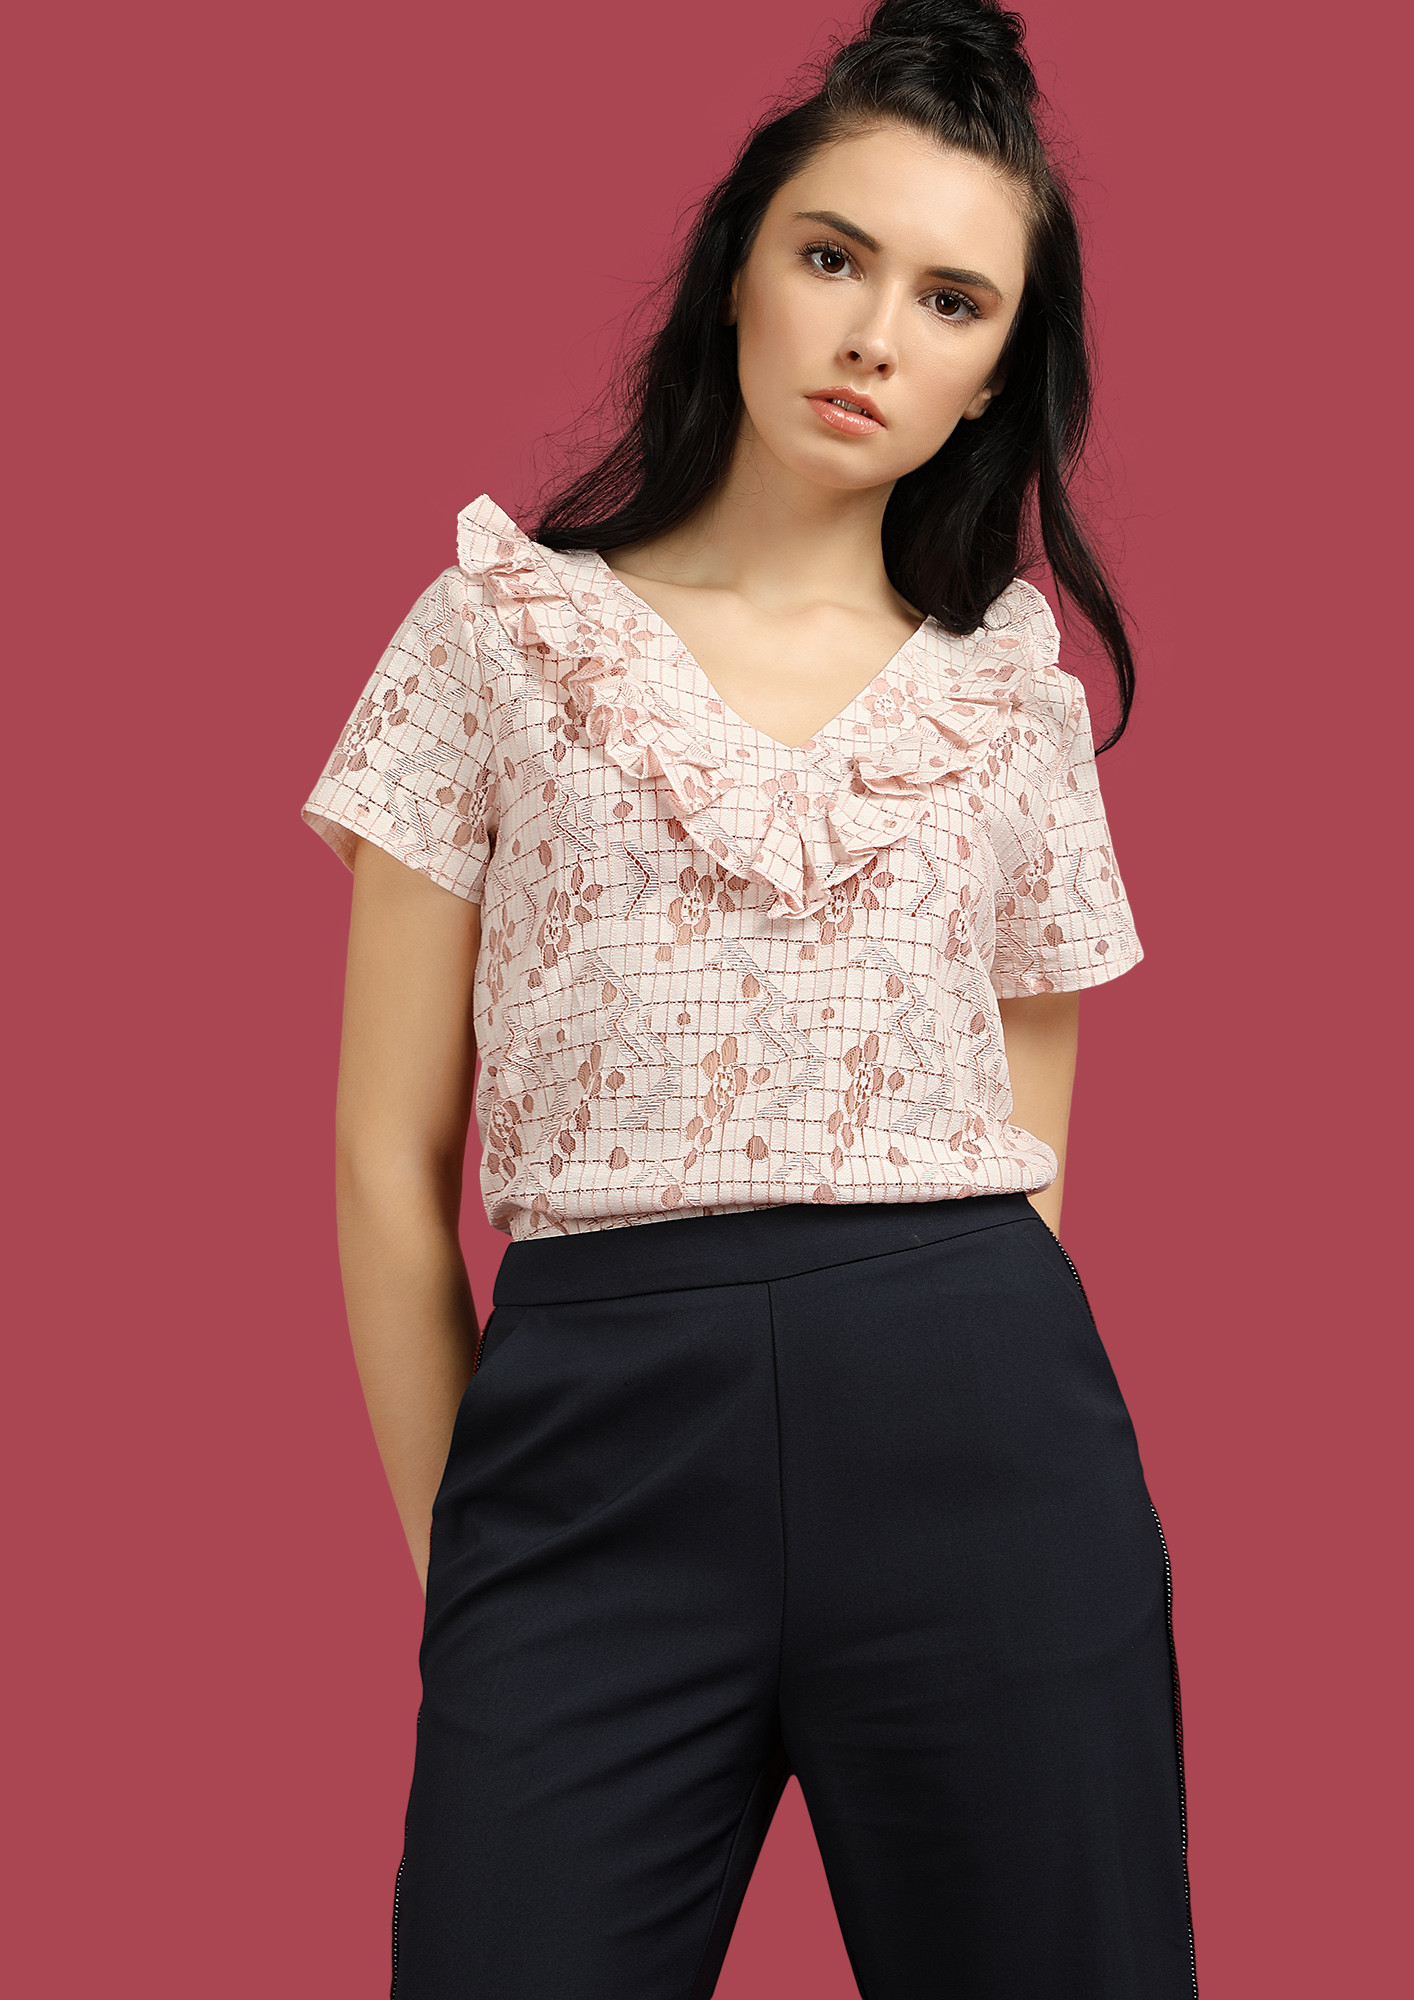 THERE IS NO STOPPING RUFFLE PINK BLOUSE